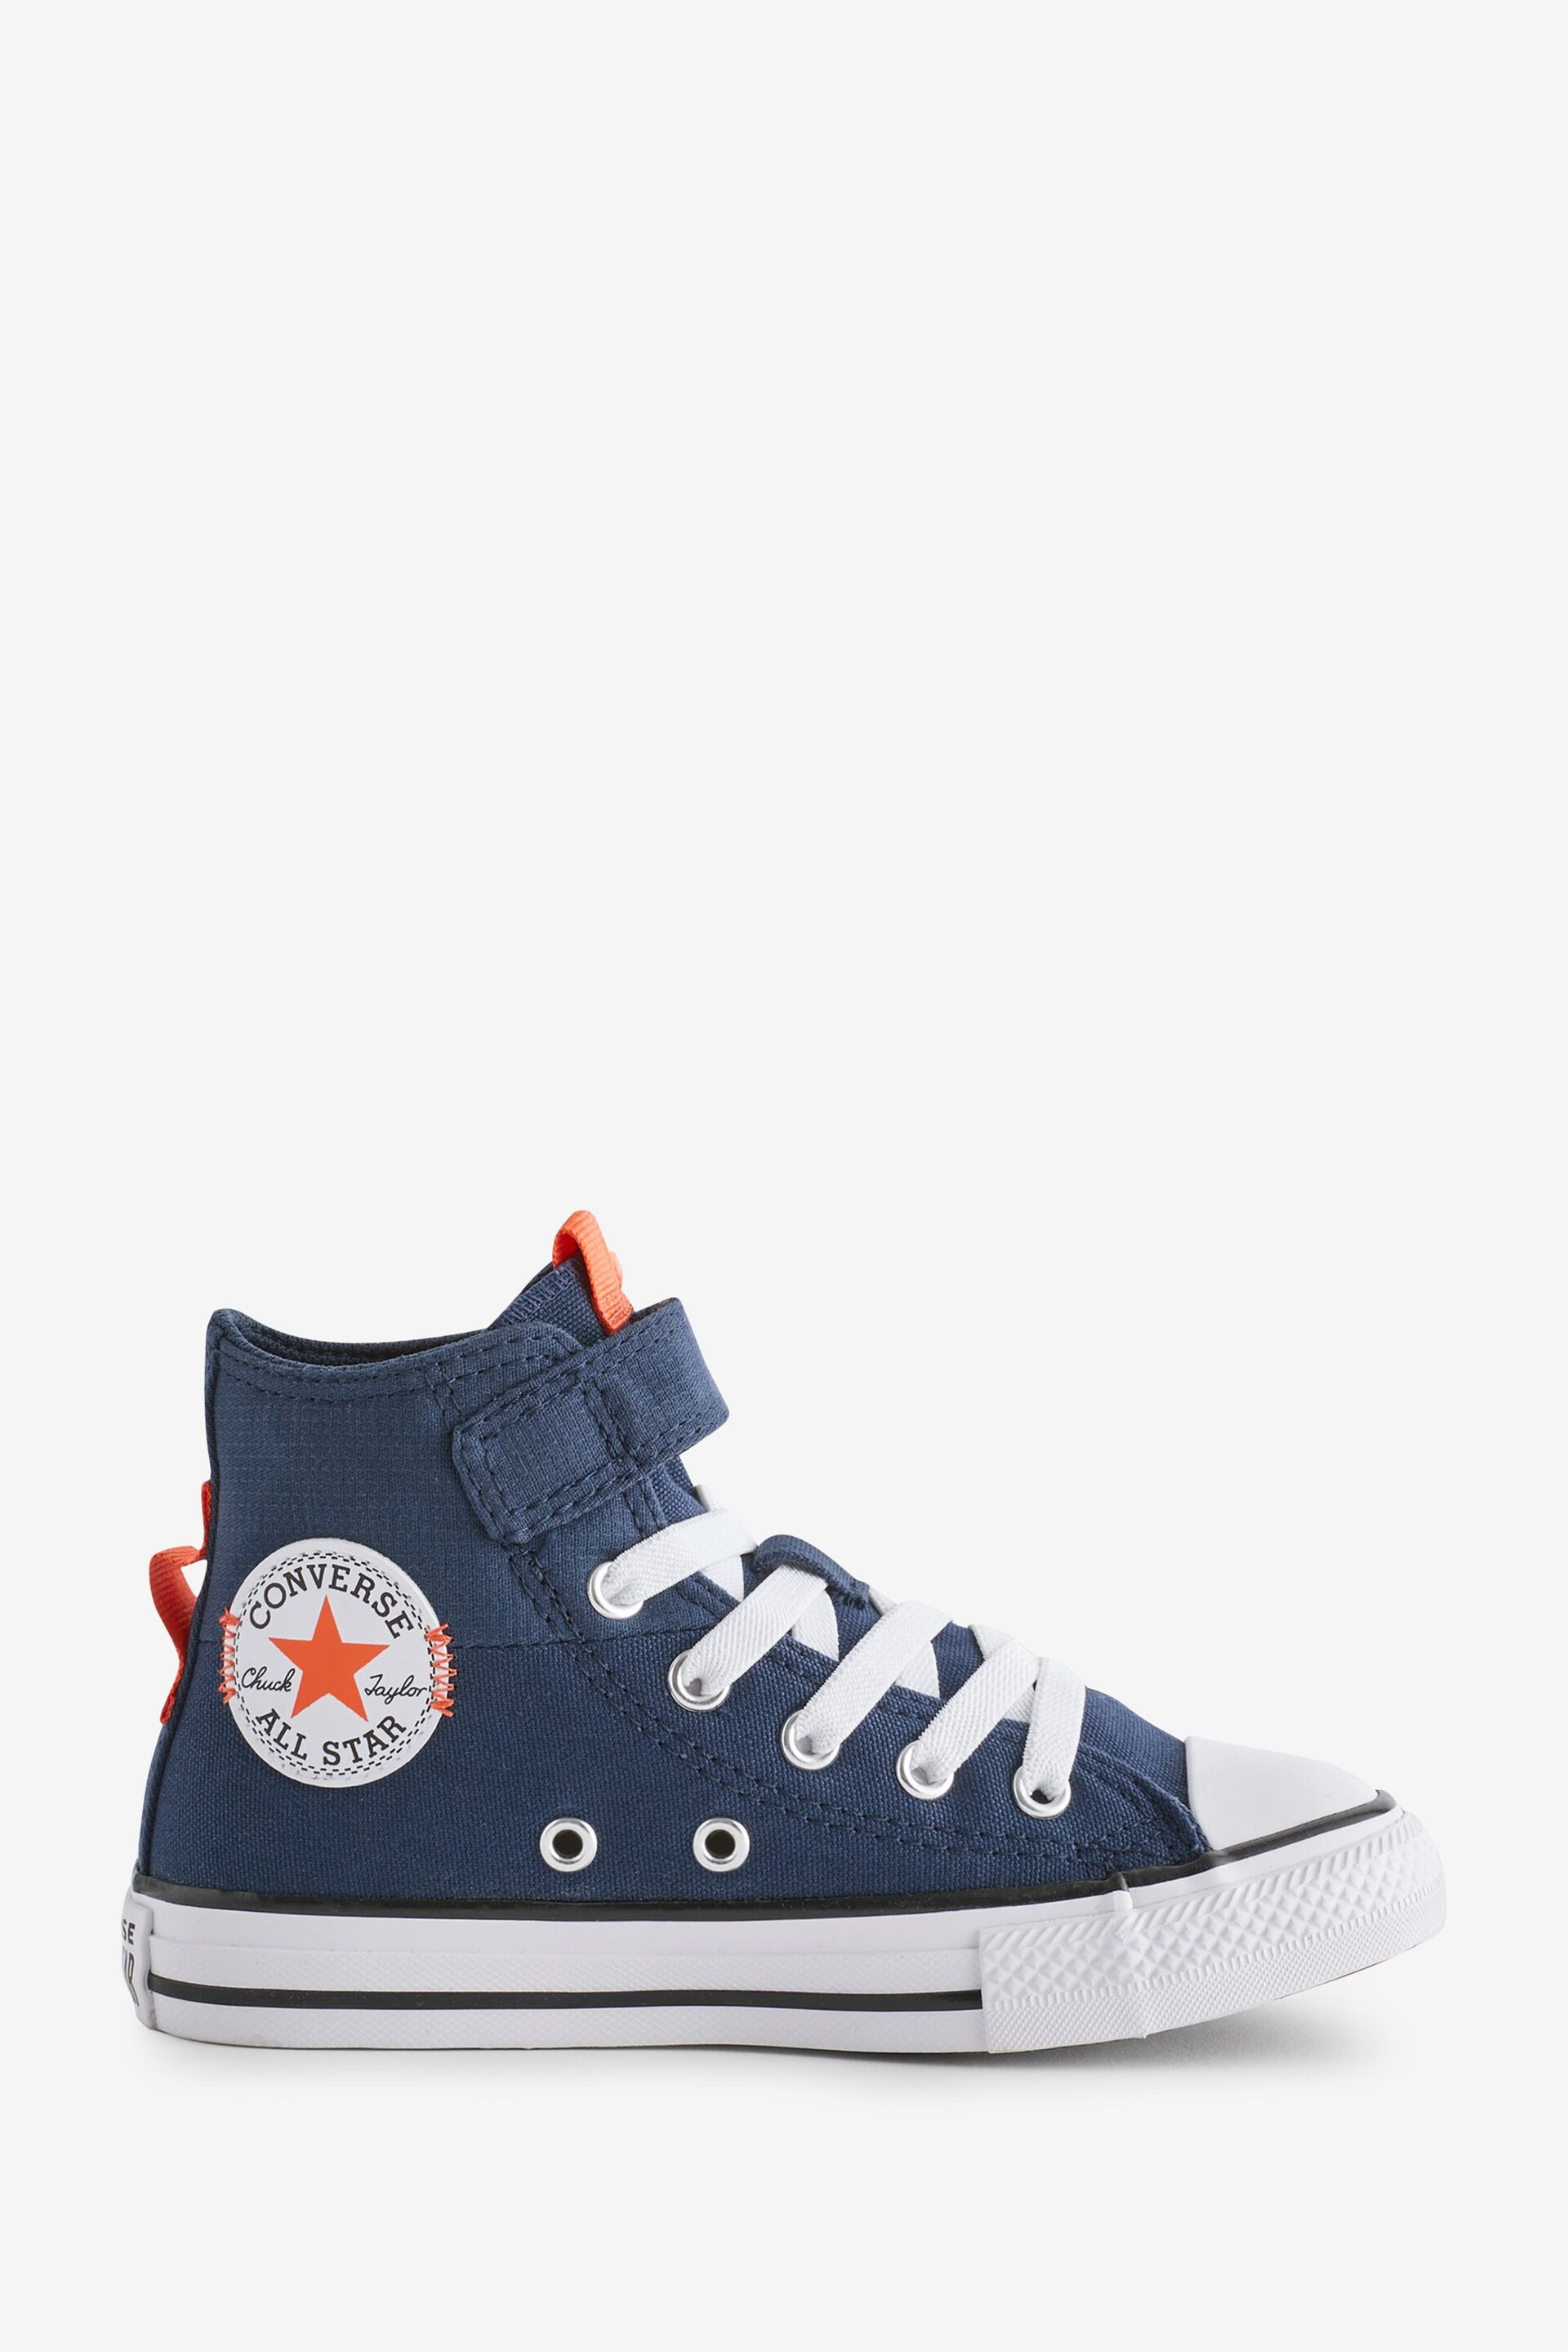 Converse Navy Chuck Taylor All Star 1V Junior Trainers - Image 1 of 9